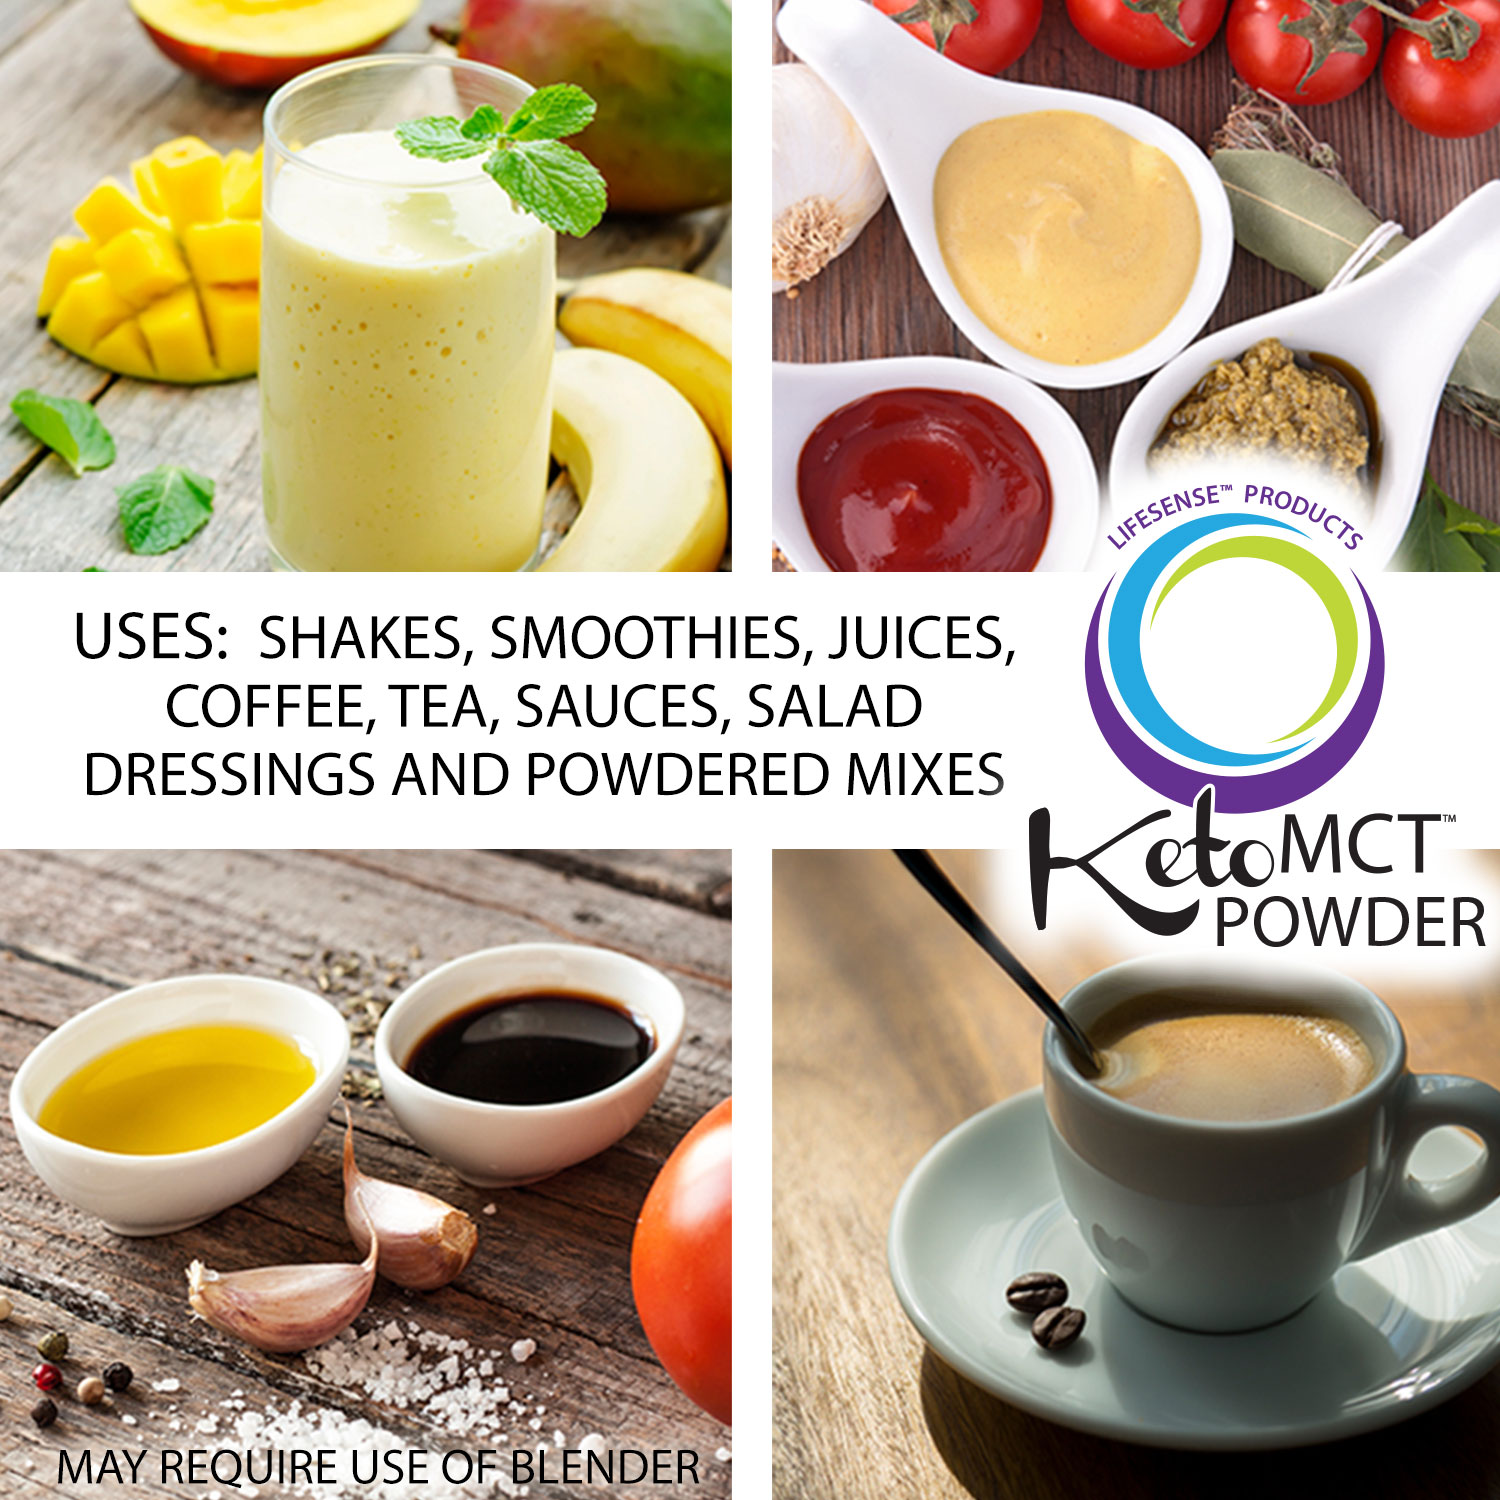 This formula is very versatile and a perfect keto alternative to dairy-free creamer for coffee, smoothies, lattes, tea, yogurt.